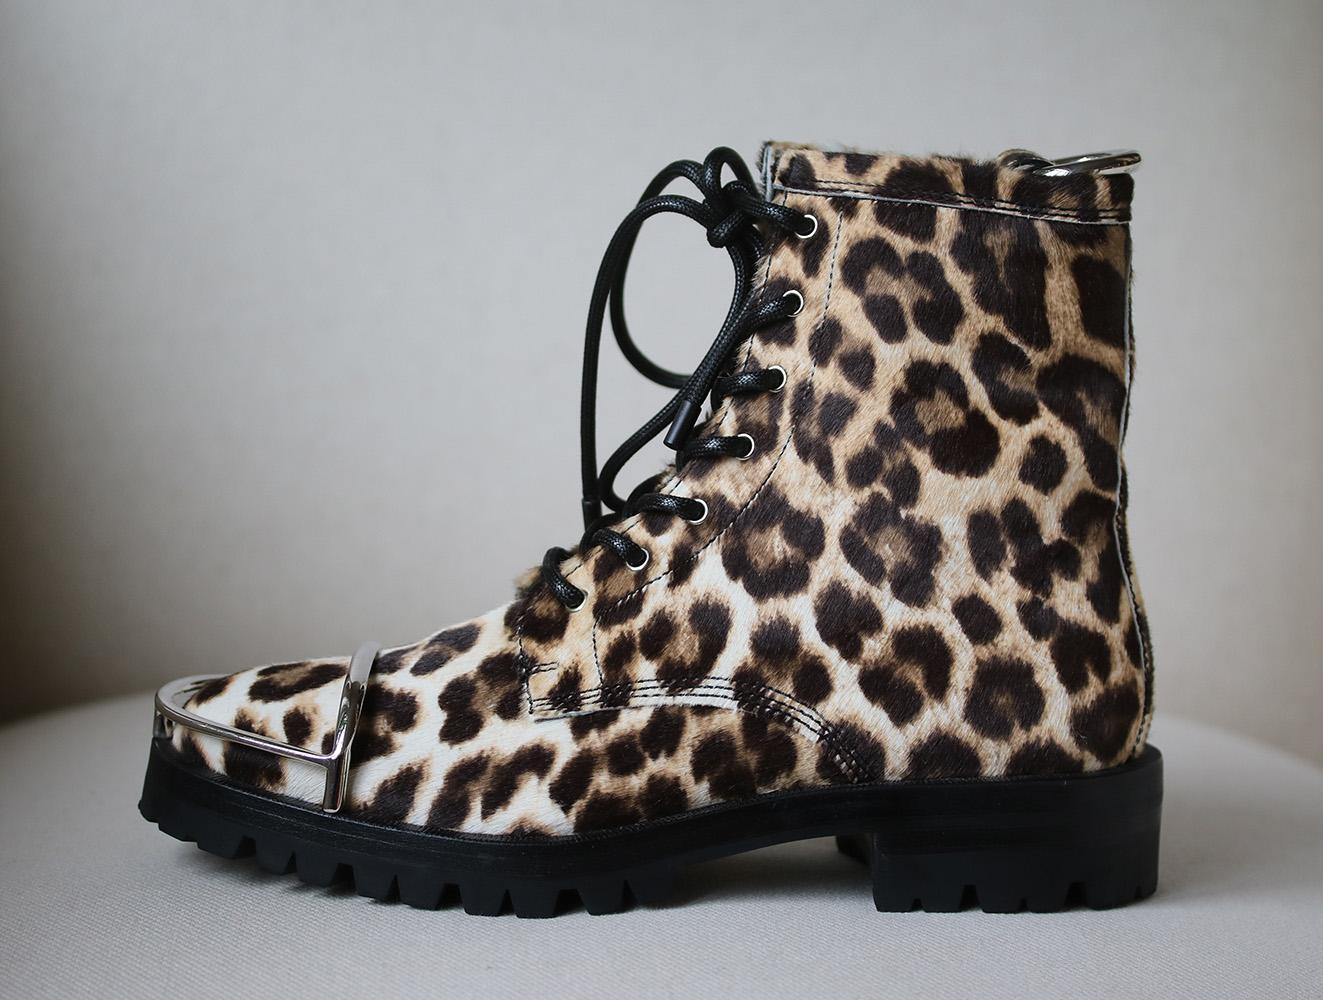 Alexander Wang is a huge fan of punk rock – the sub-culture is reflected in so many of his designs, including these 'Lyndon' combat boots. Made from leopard-print calf hair and grounded with chunky rubber lug soles, this pair is accented with